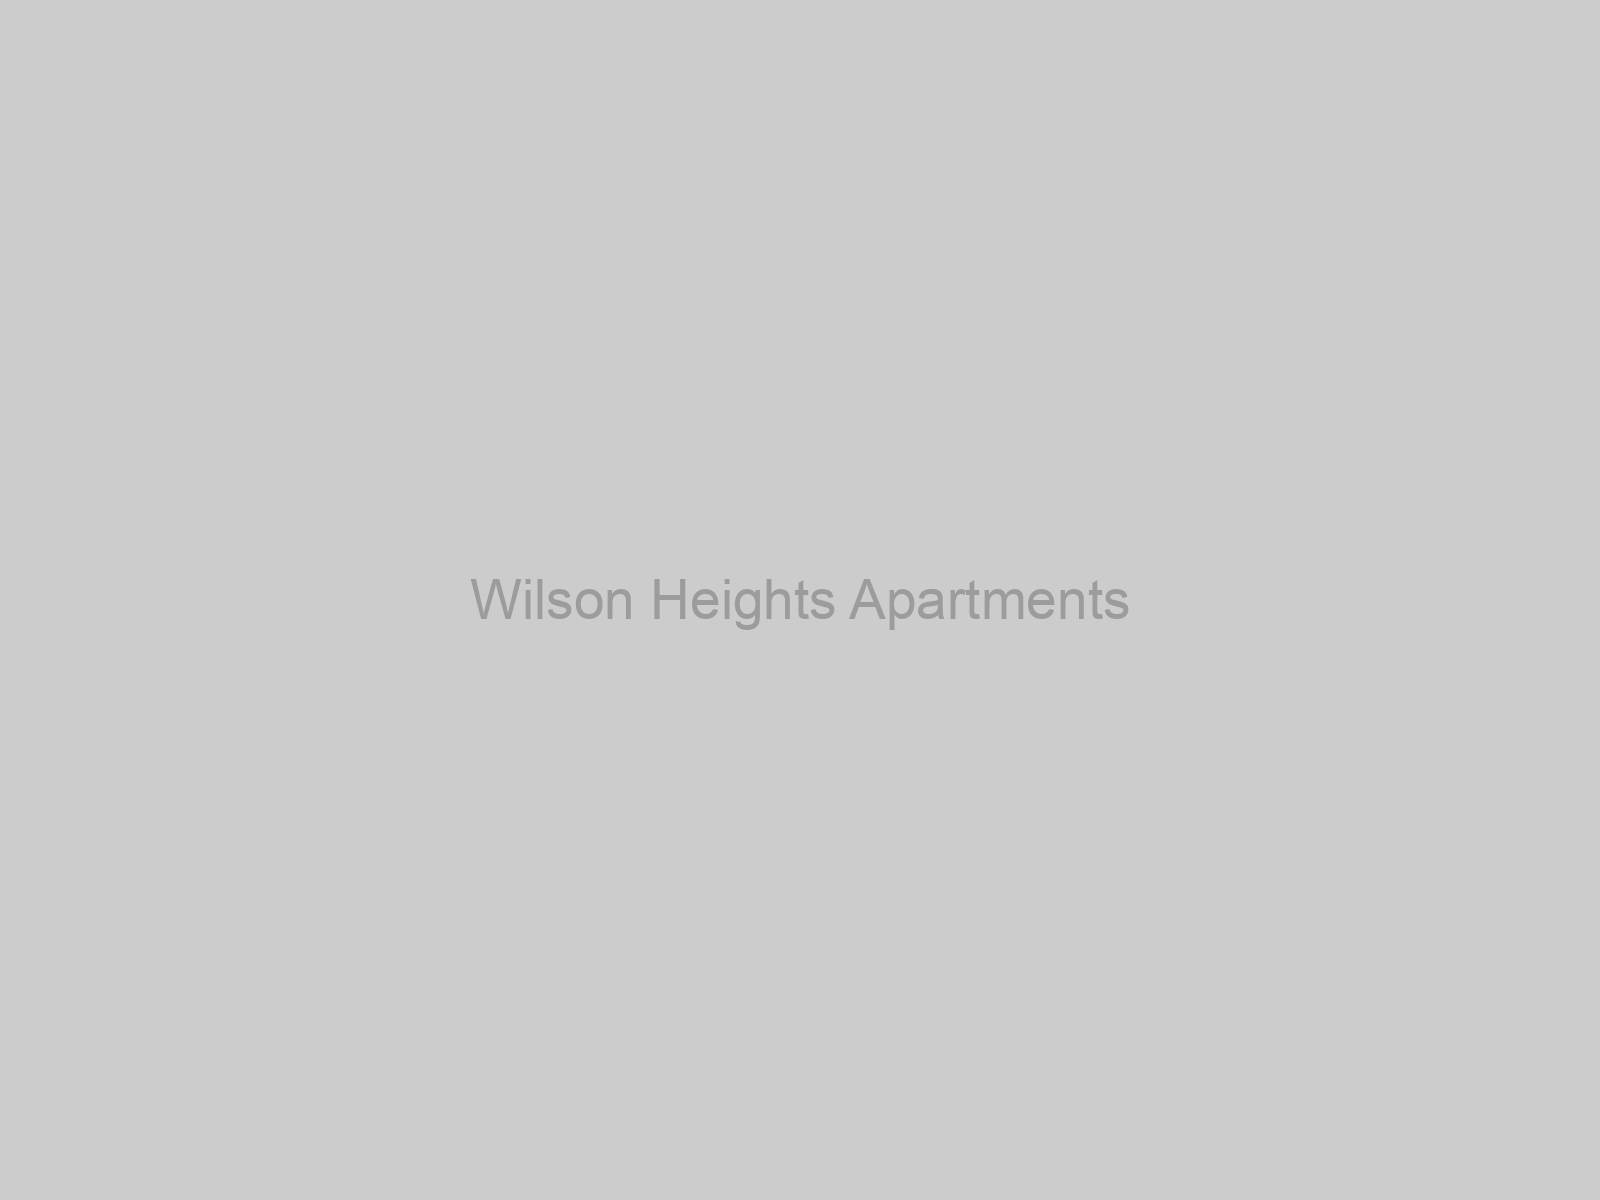 Wilson Heights Apartments